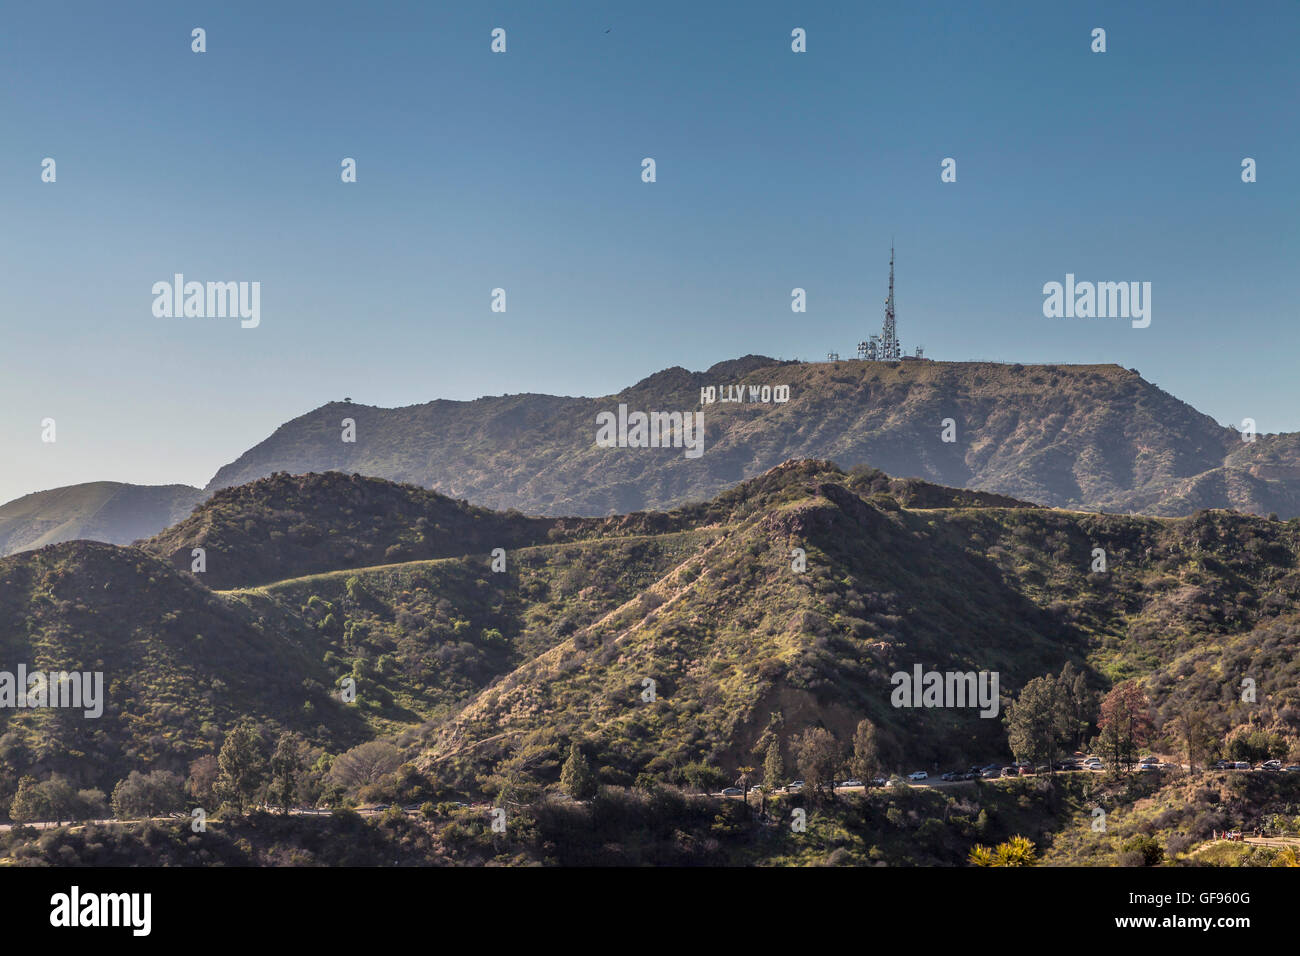 The Hollywood Sign on Mount Lee, Hollywood Hills, Los Angeles, California, USA Stock Photo